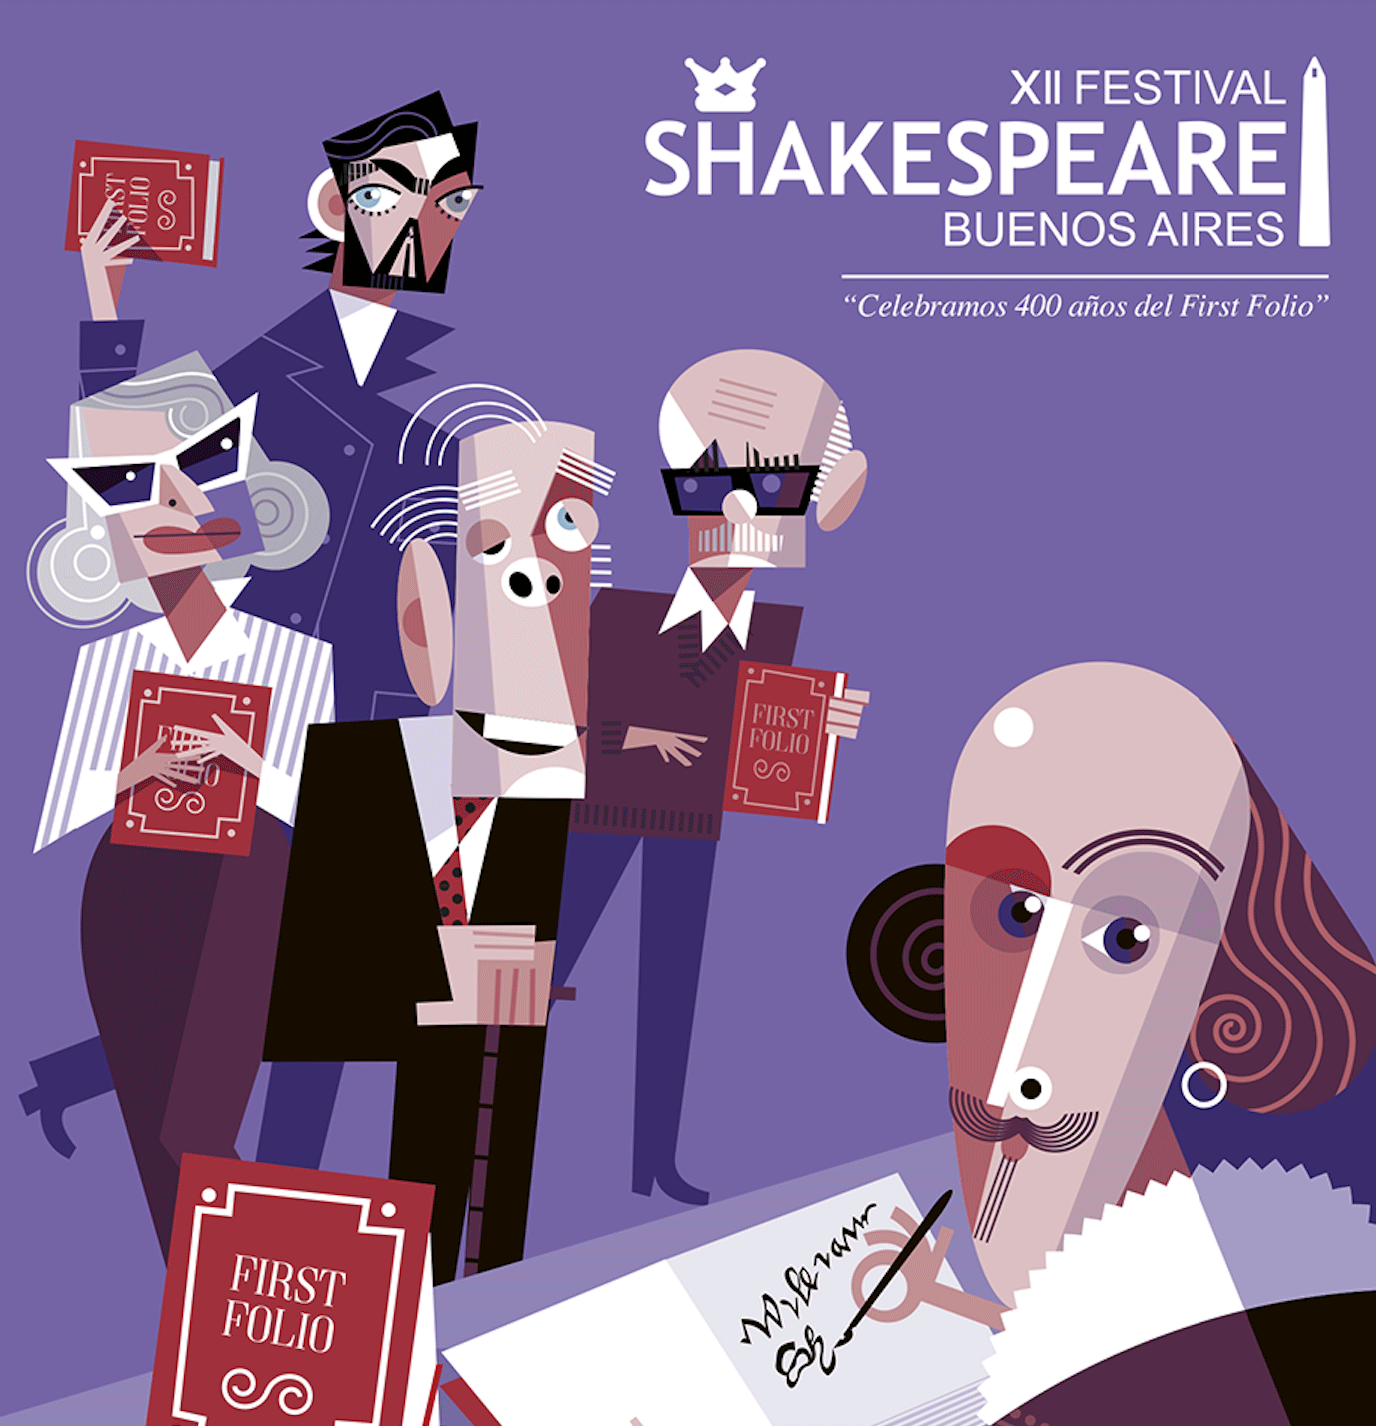 XII FESTIVAL SHAKESPEARE BUENOS AIRES